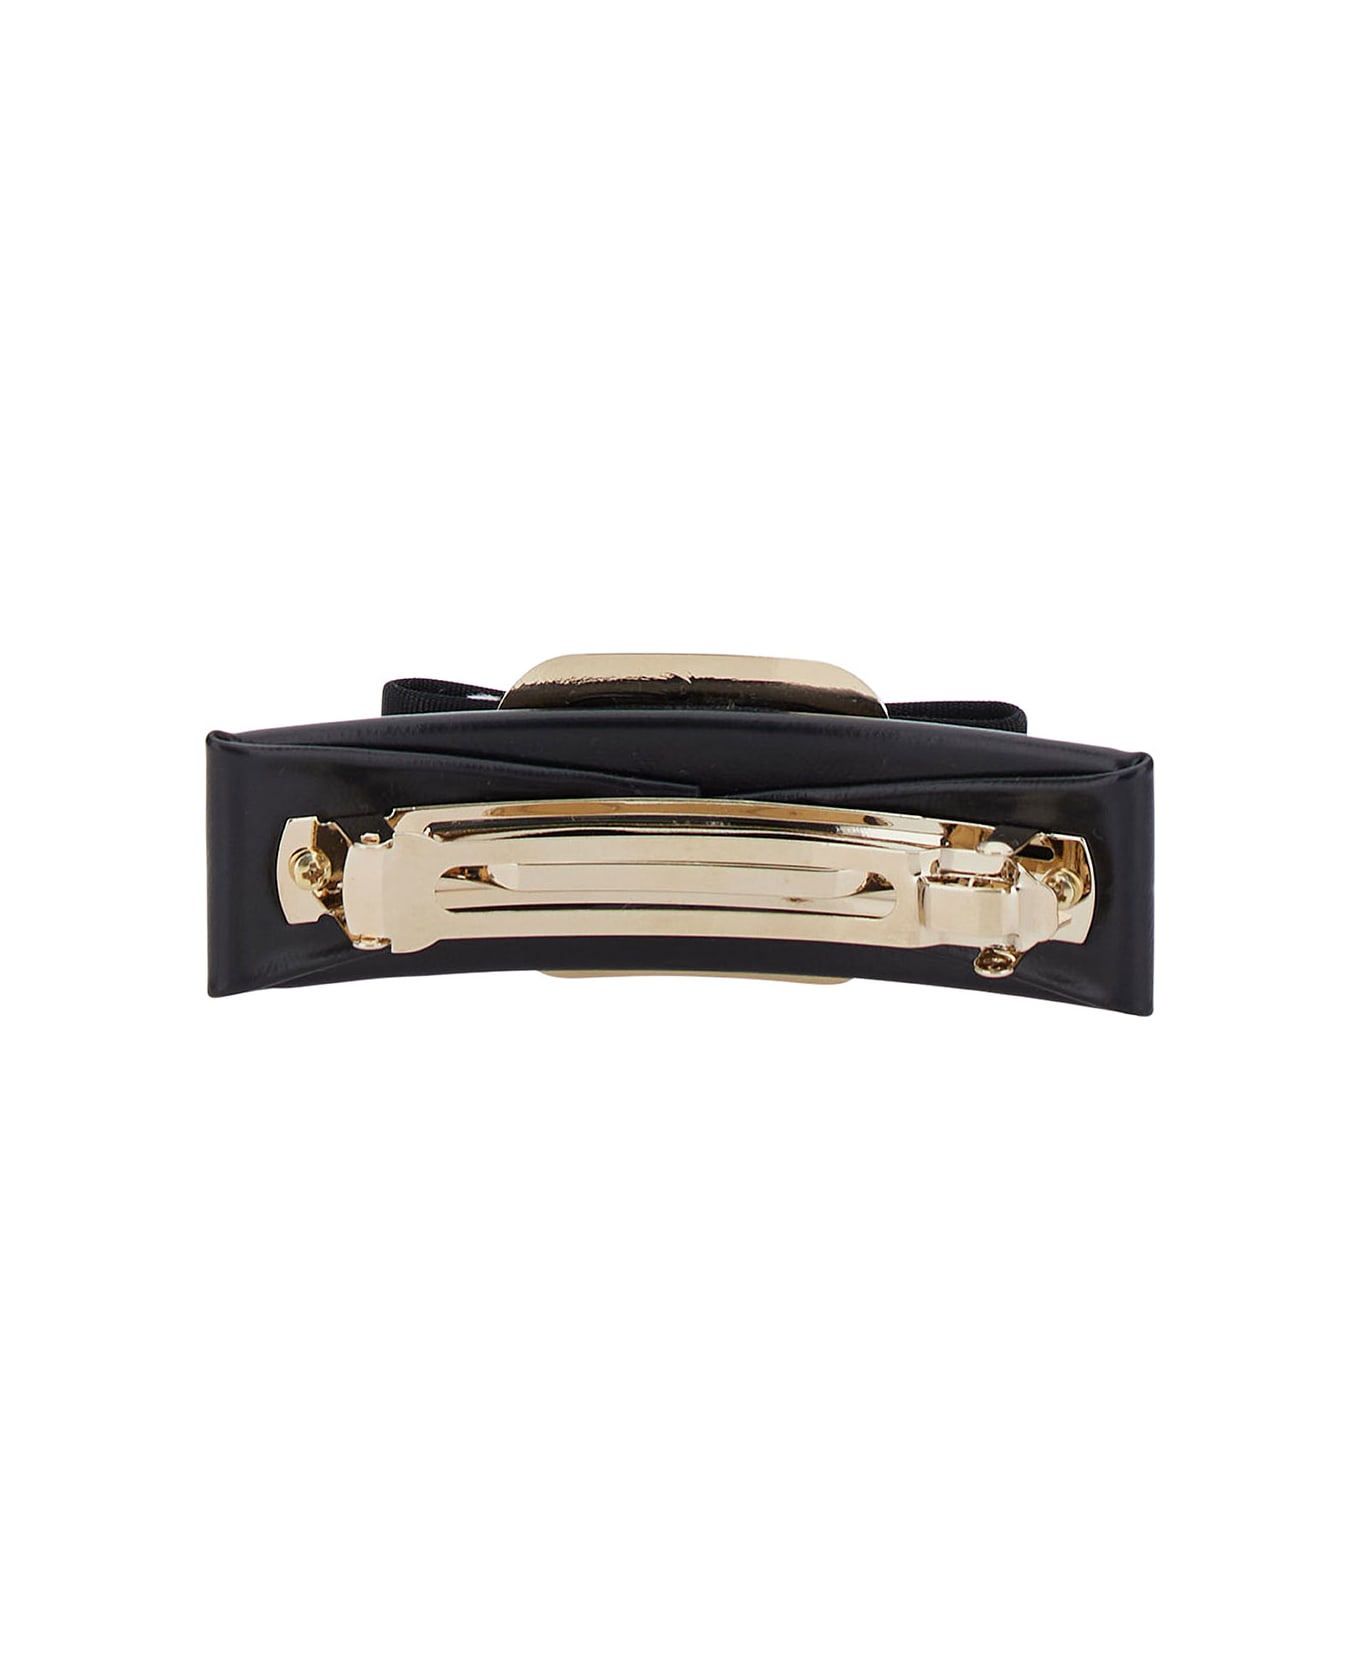 Ferragamo Black Hairclip With Vara Bow In Leather Blend Woman - NERO ブローチ